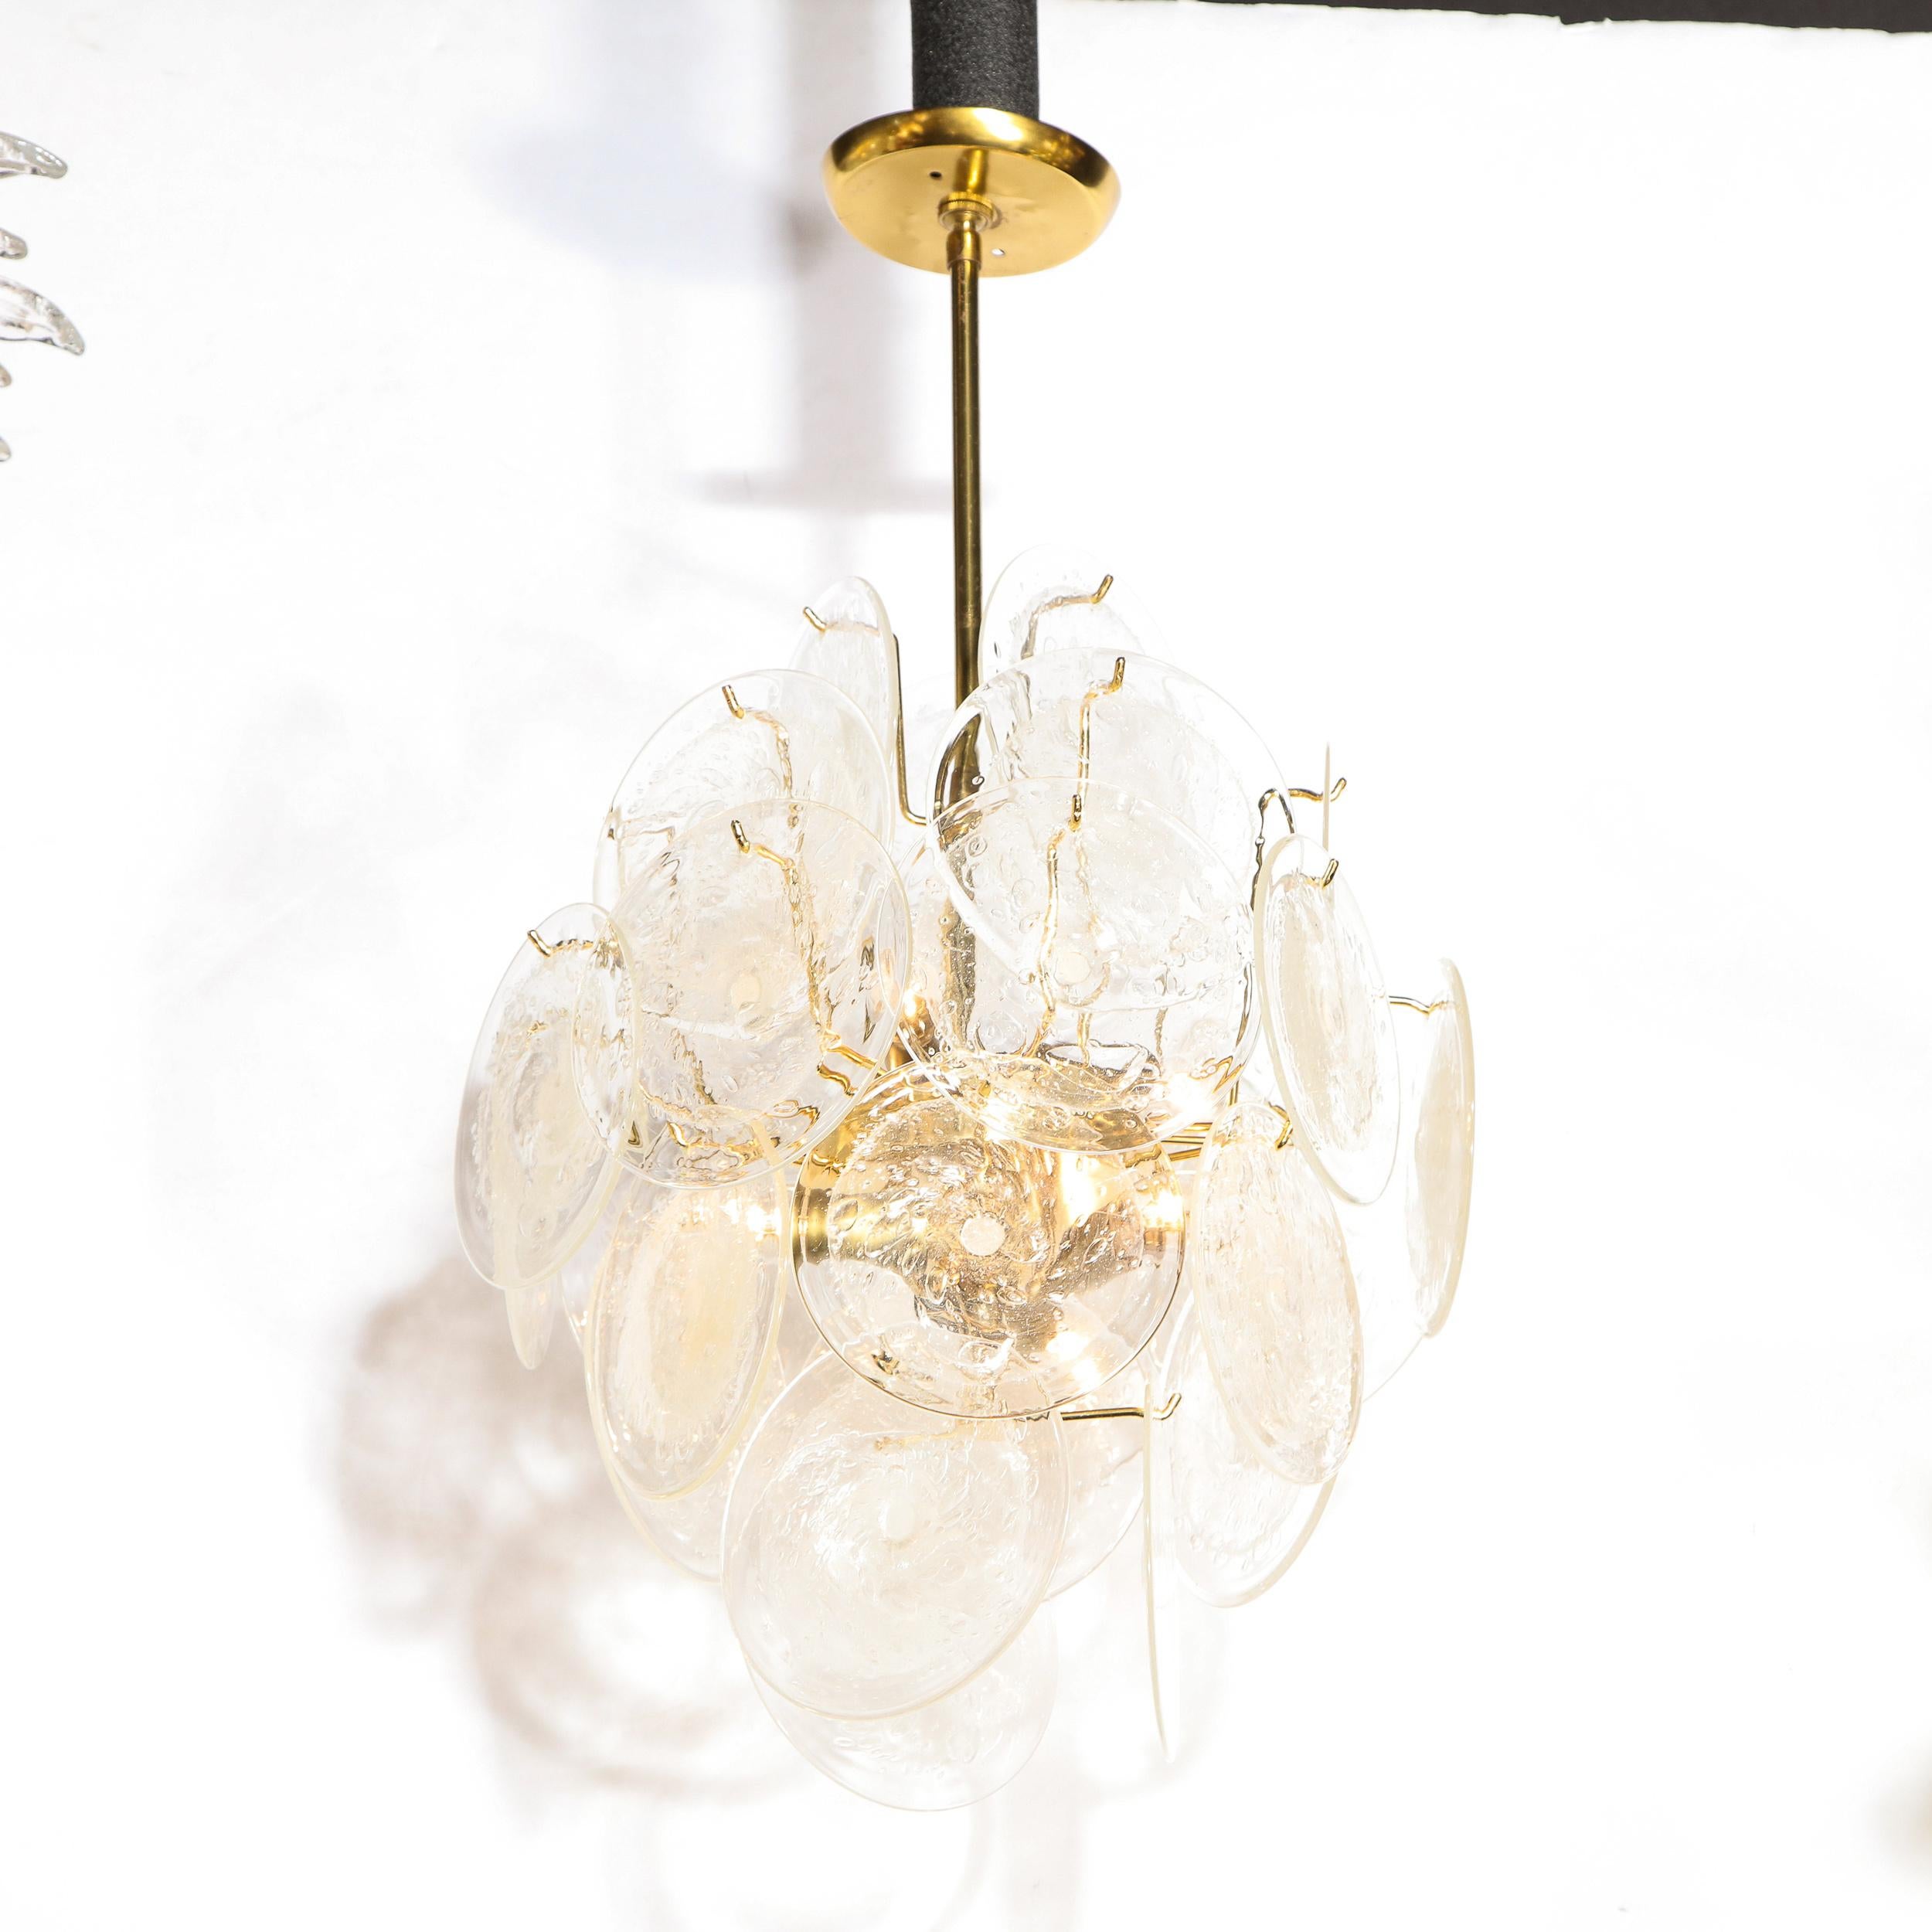 Modernist Handblown Translucent Murano Disc Pendant Chandelier W/ Brass Fittings In Distressed Condition In New York, NY